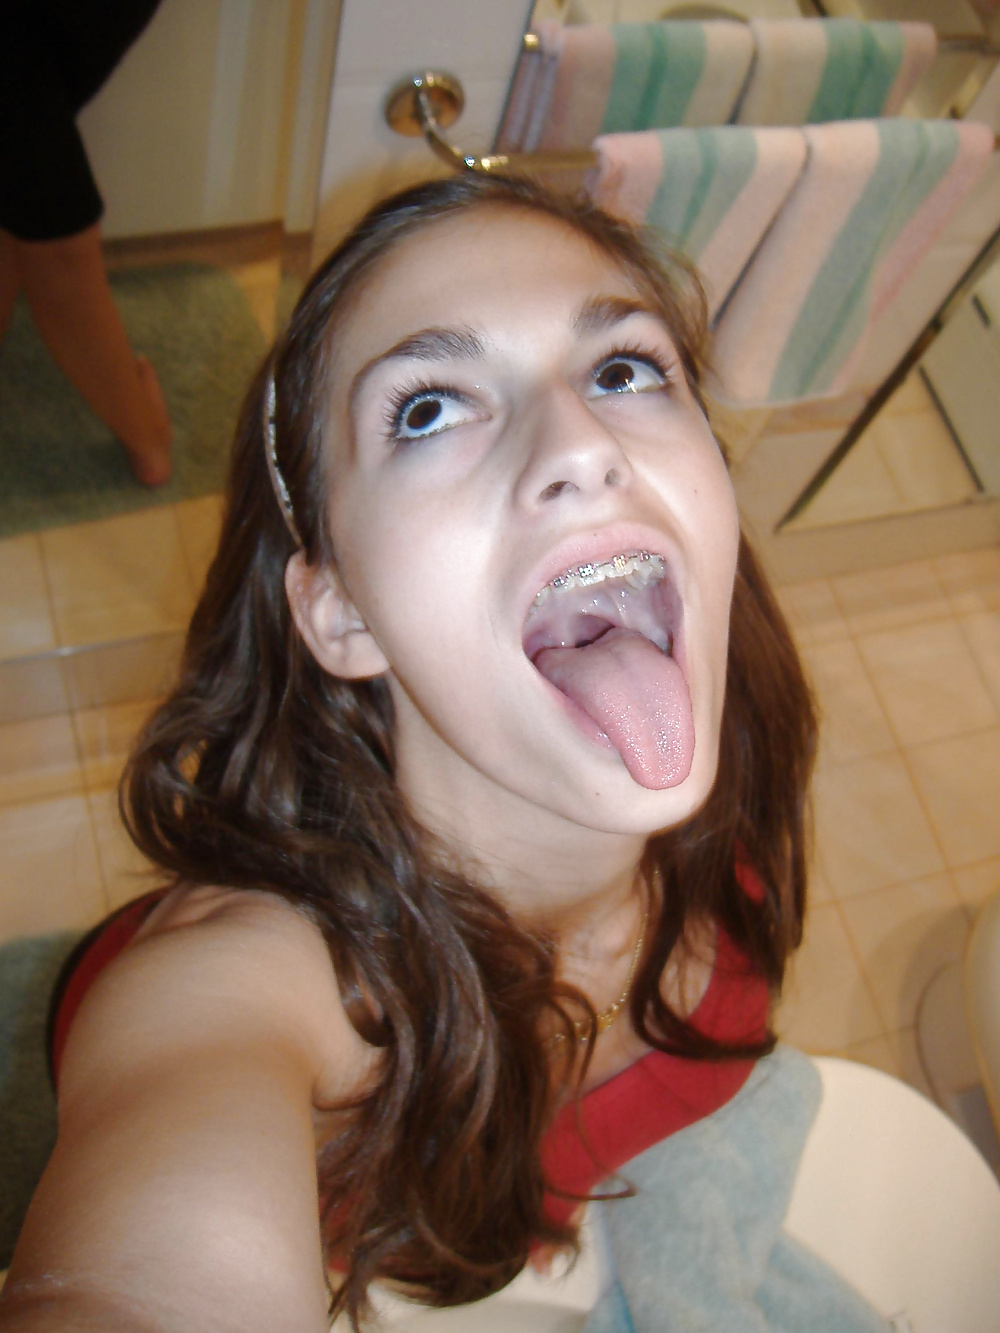 Free Teen Girls - tongue out and mouth open - Part 1 photos